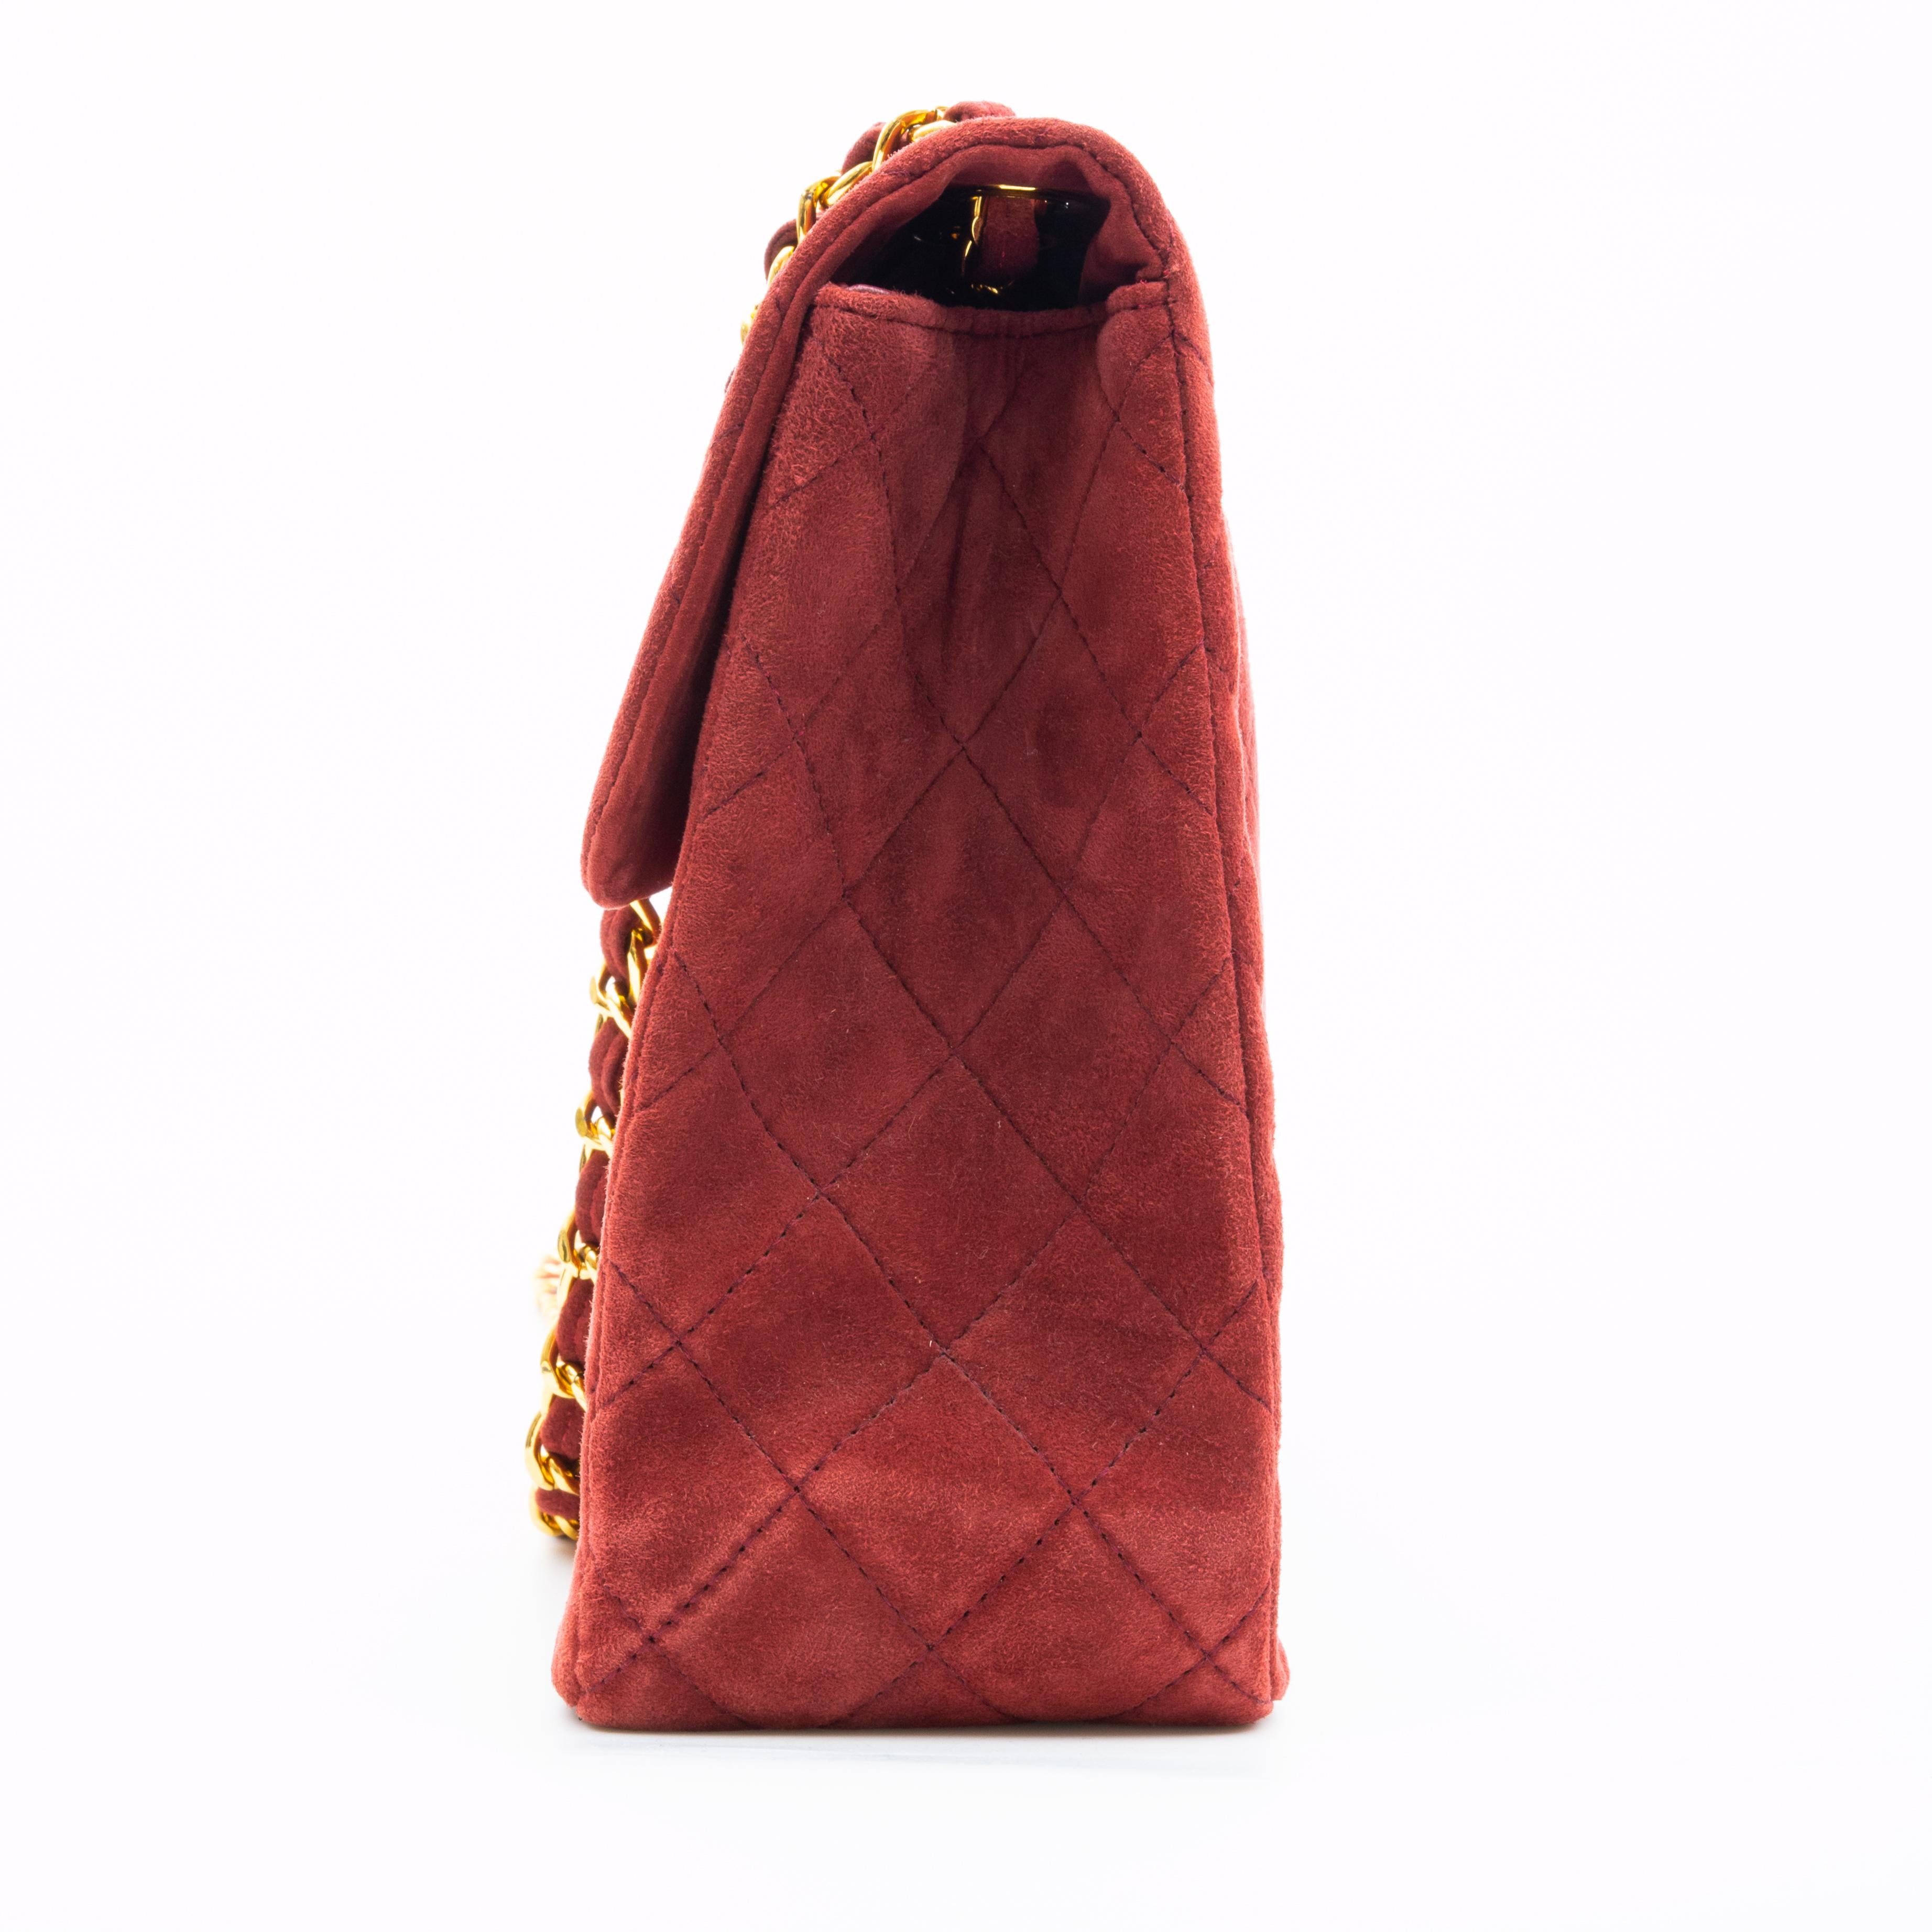 Chanel Classic Quilted Burgundy Suede Jumbo Single Flap Bag For Sale 1